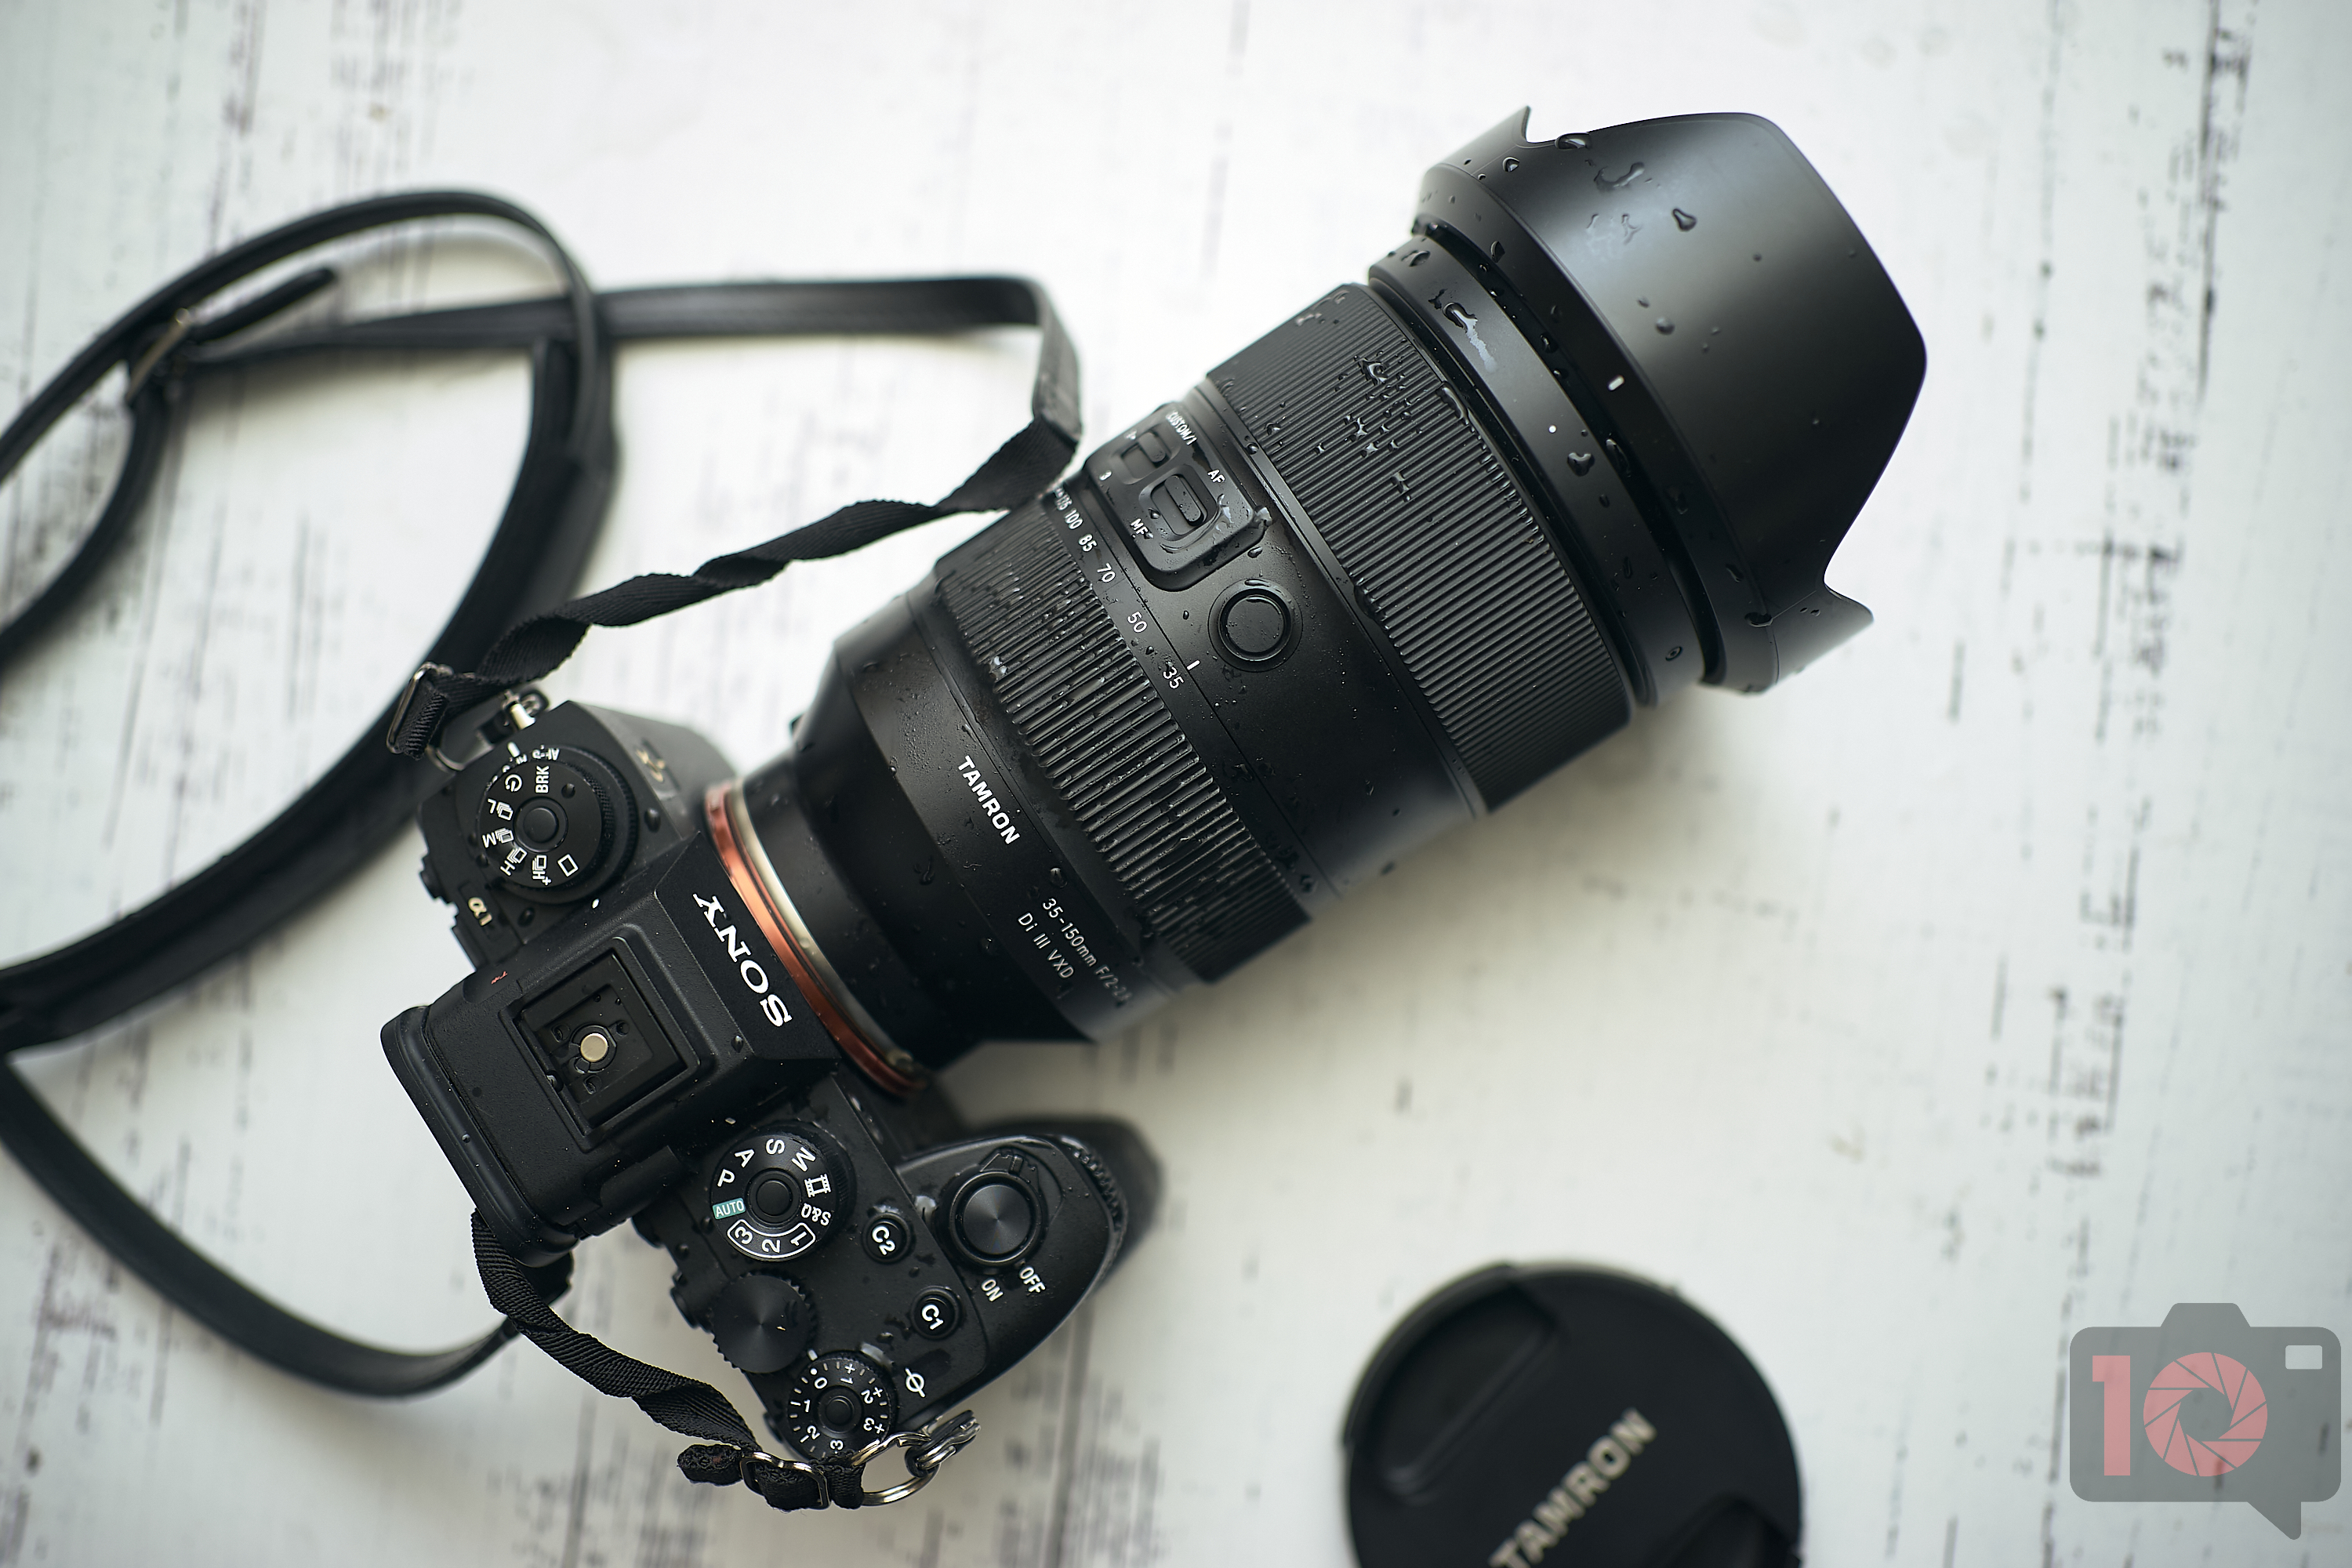 Chris Gampat The Phoblographer Tamron 35-150mm f2-2.8 review product images 2.21-250s400 6